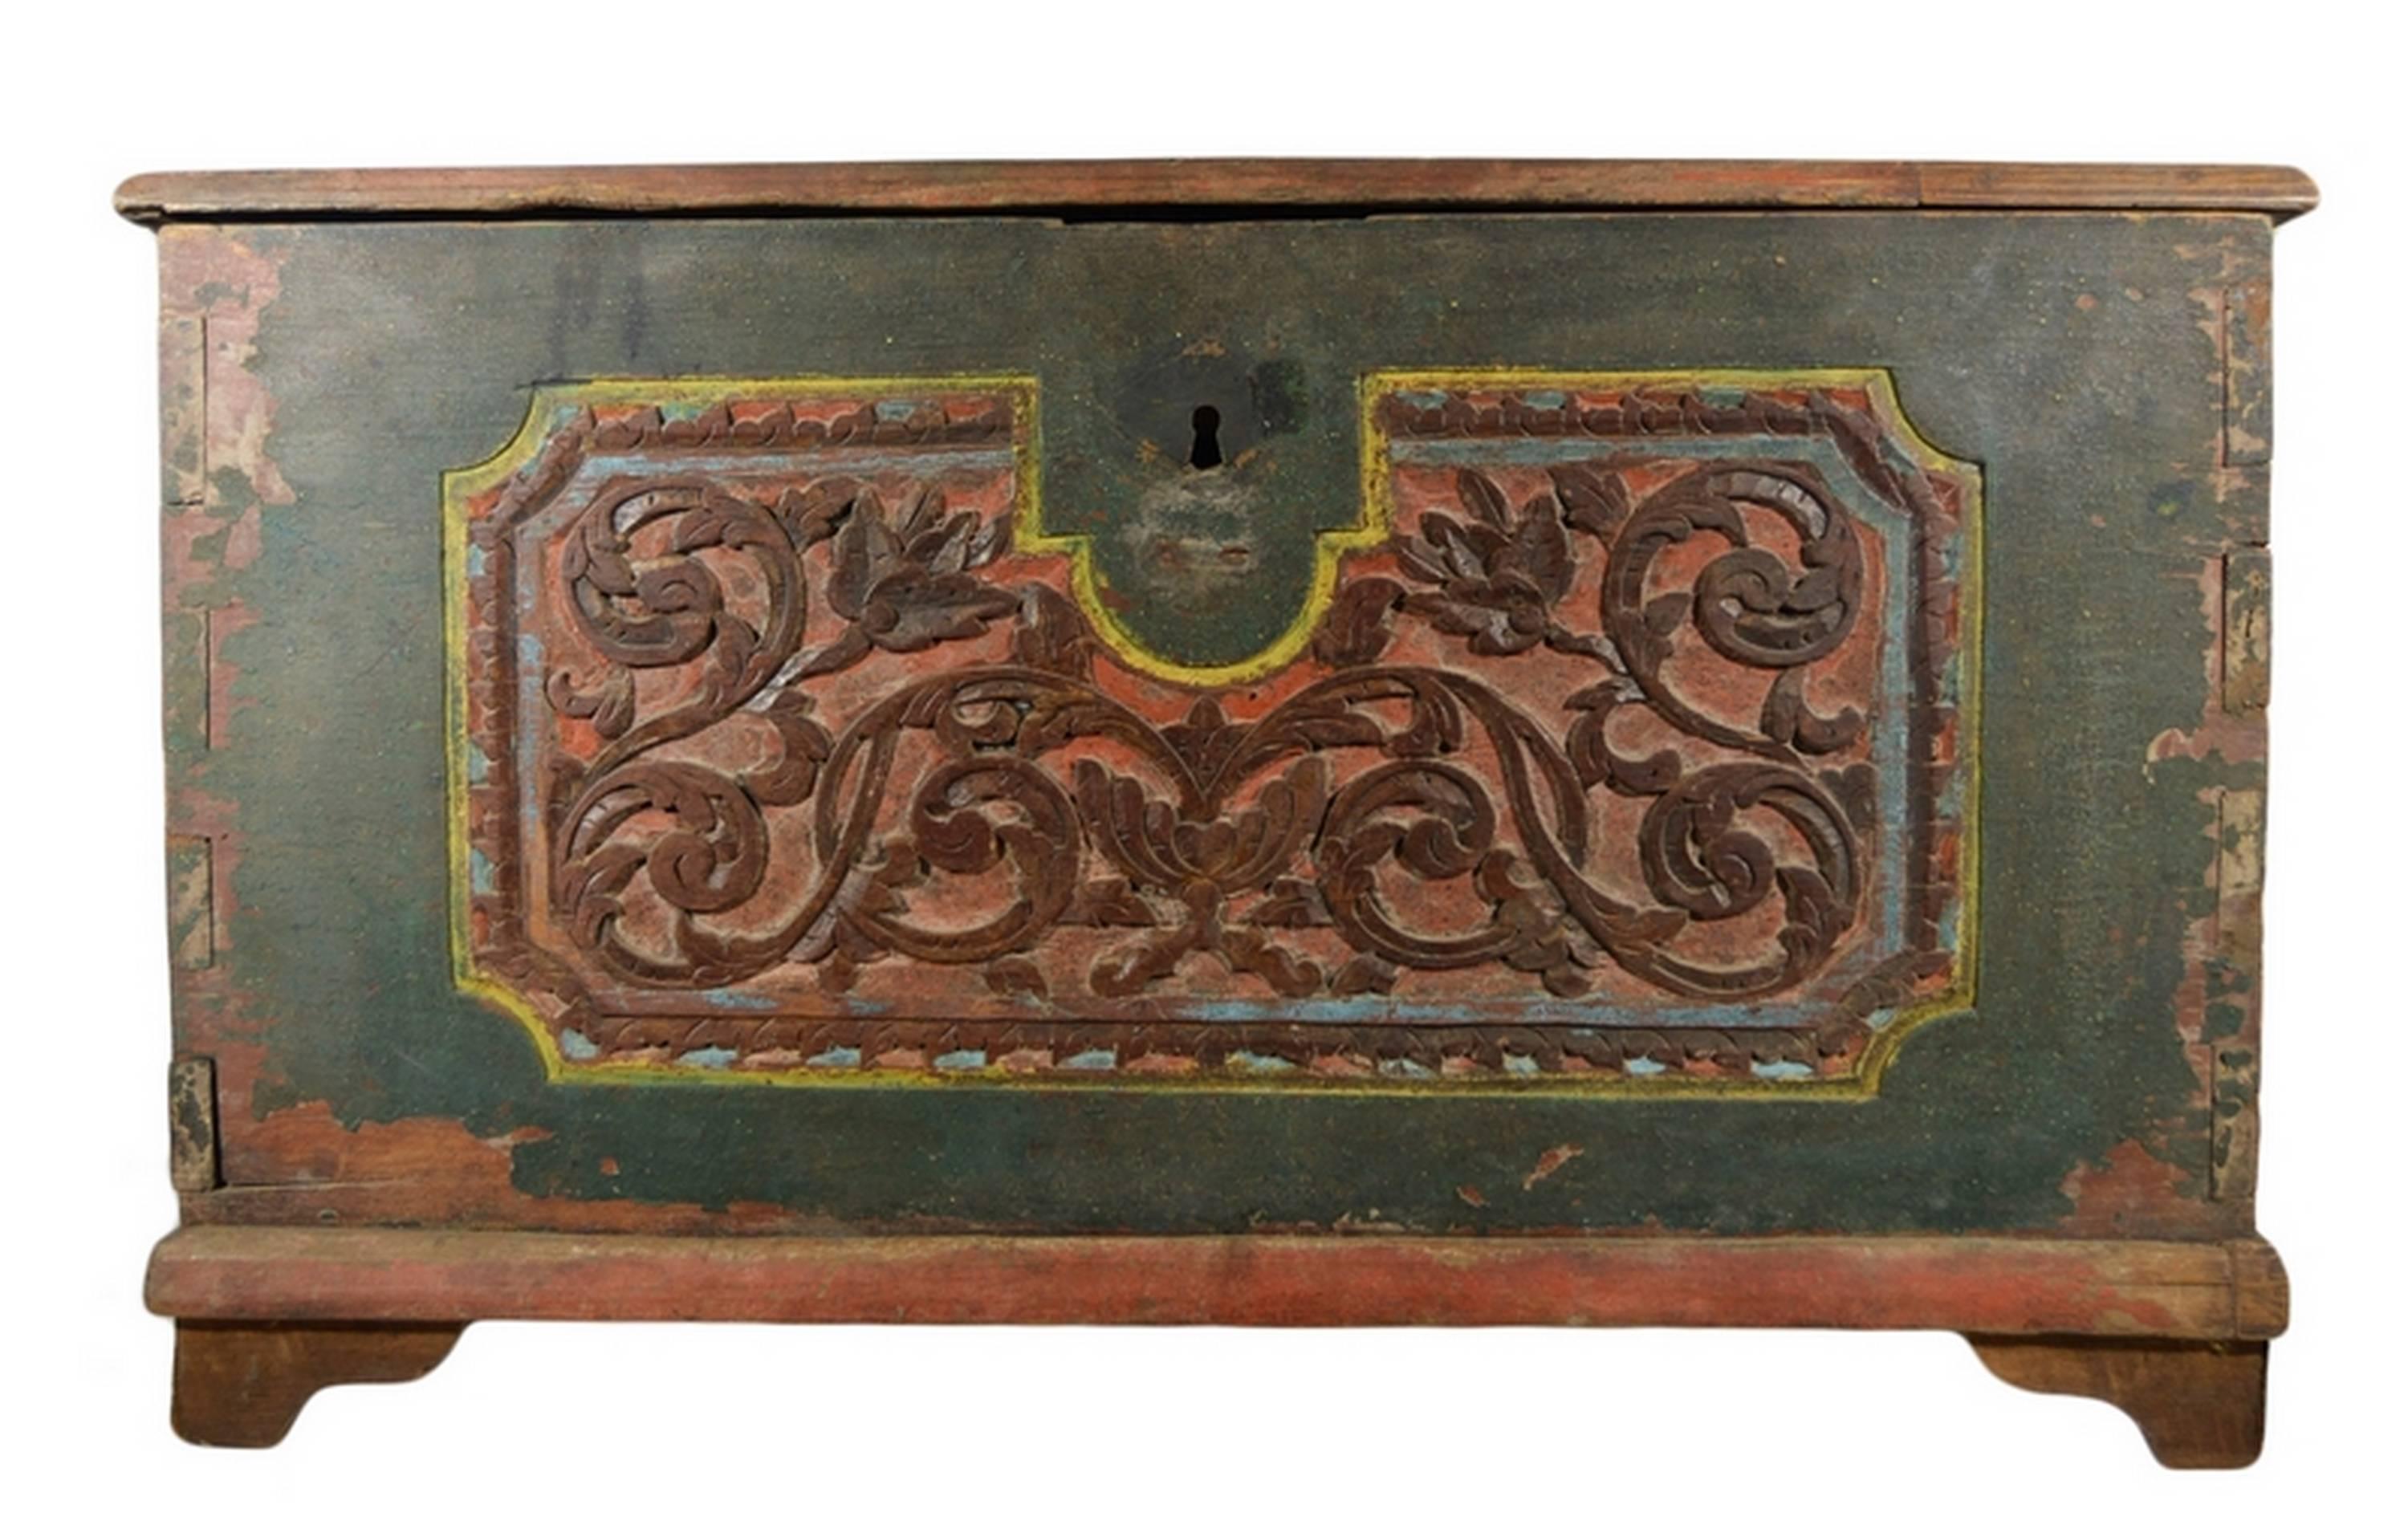 indonesian hand carved furniture